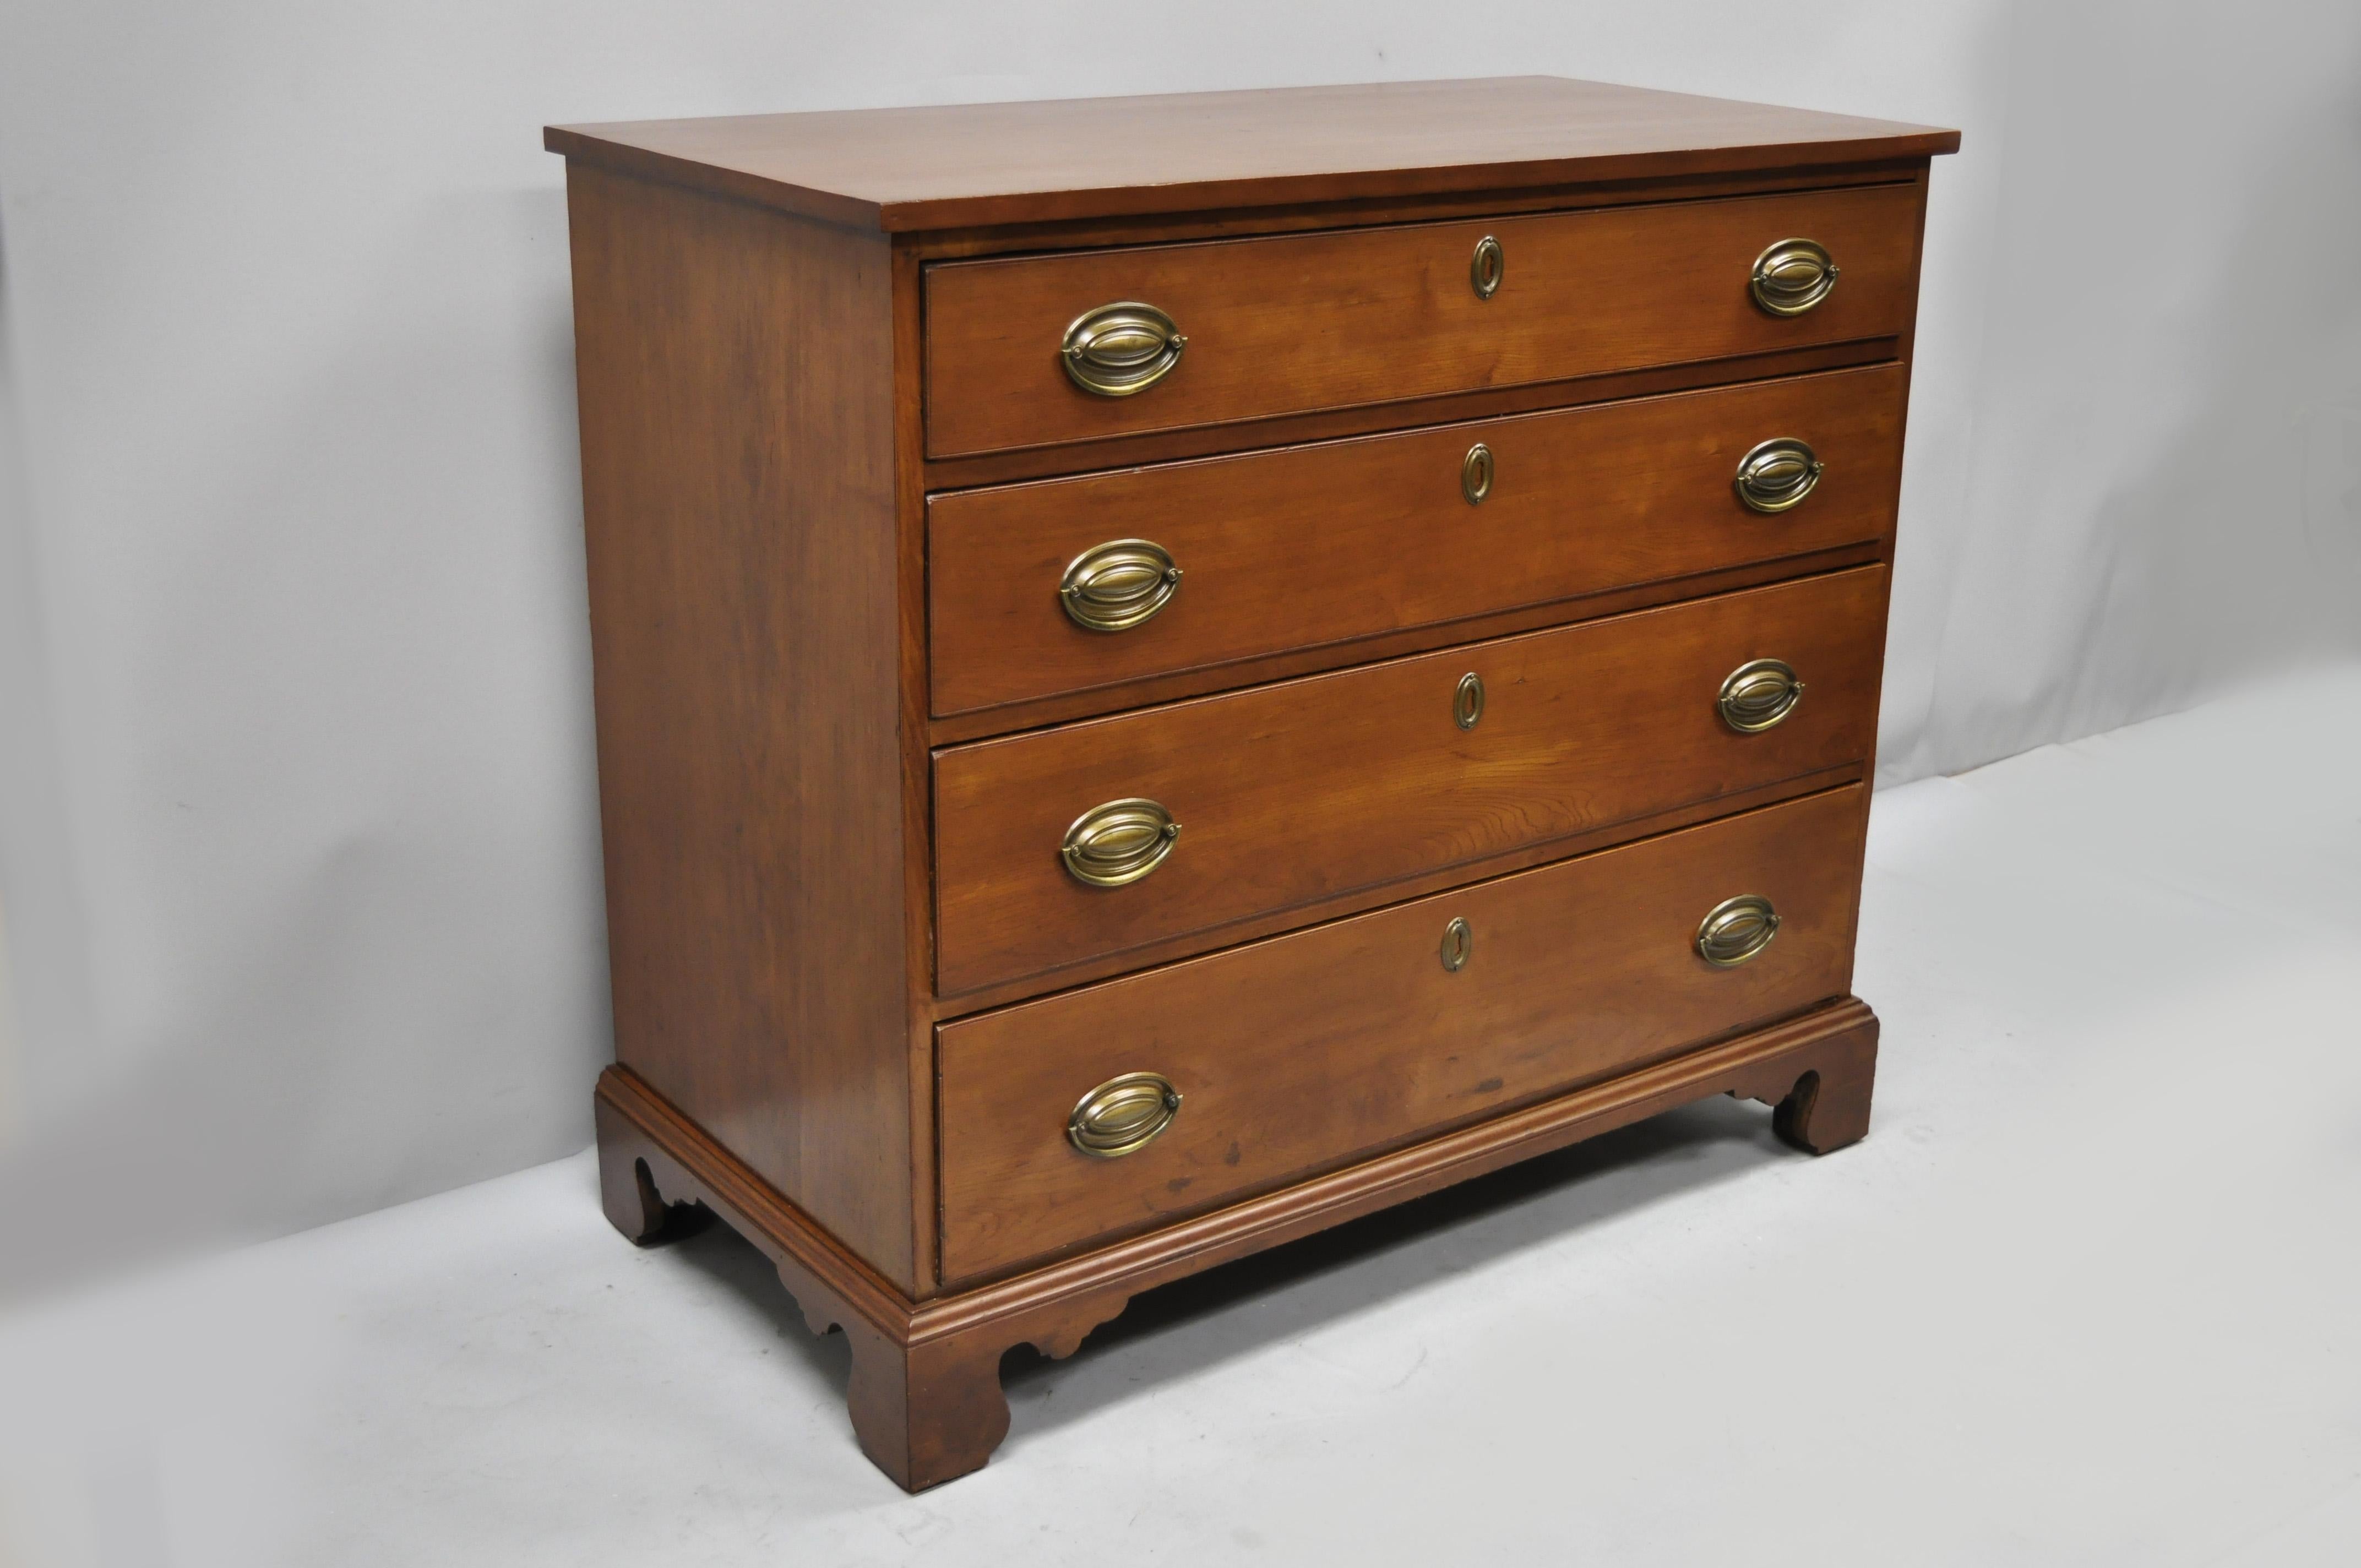 19th century antique mahogany federal dresser commode chest of drawers. Item features bracket feet, panel back, solid wood construction, beautiful wood grain, 4 dovetailed drawers, very nice antique item, quality early American craftsmanship, circa